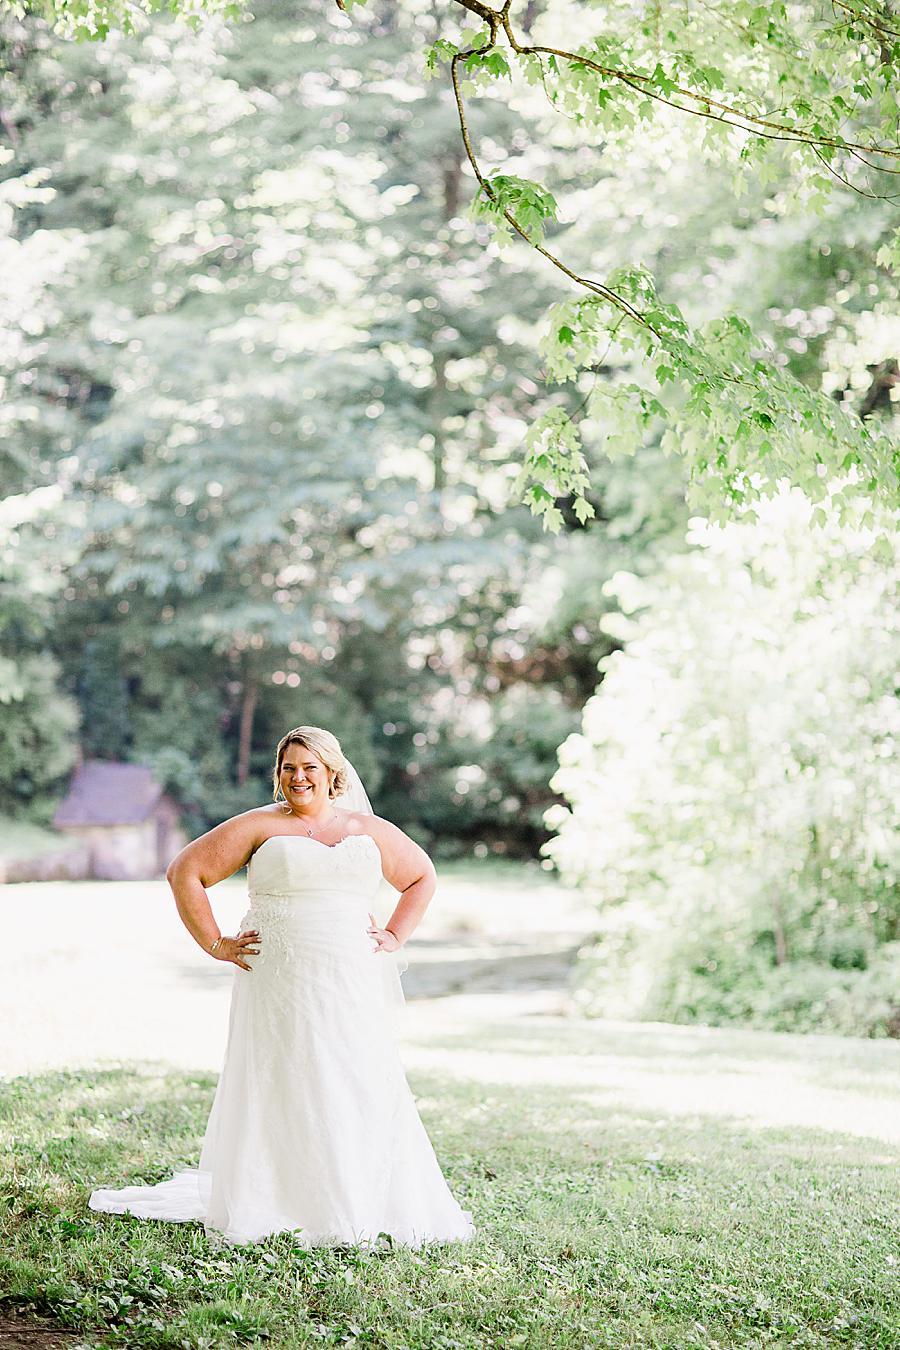 Bridal portrait at this Strawberry Creek Wedding by Knoxville Wedding Photographer, Amanda May Photos.